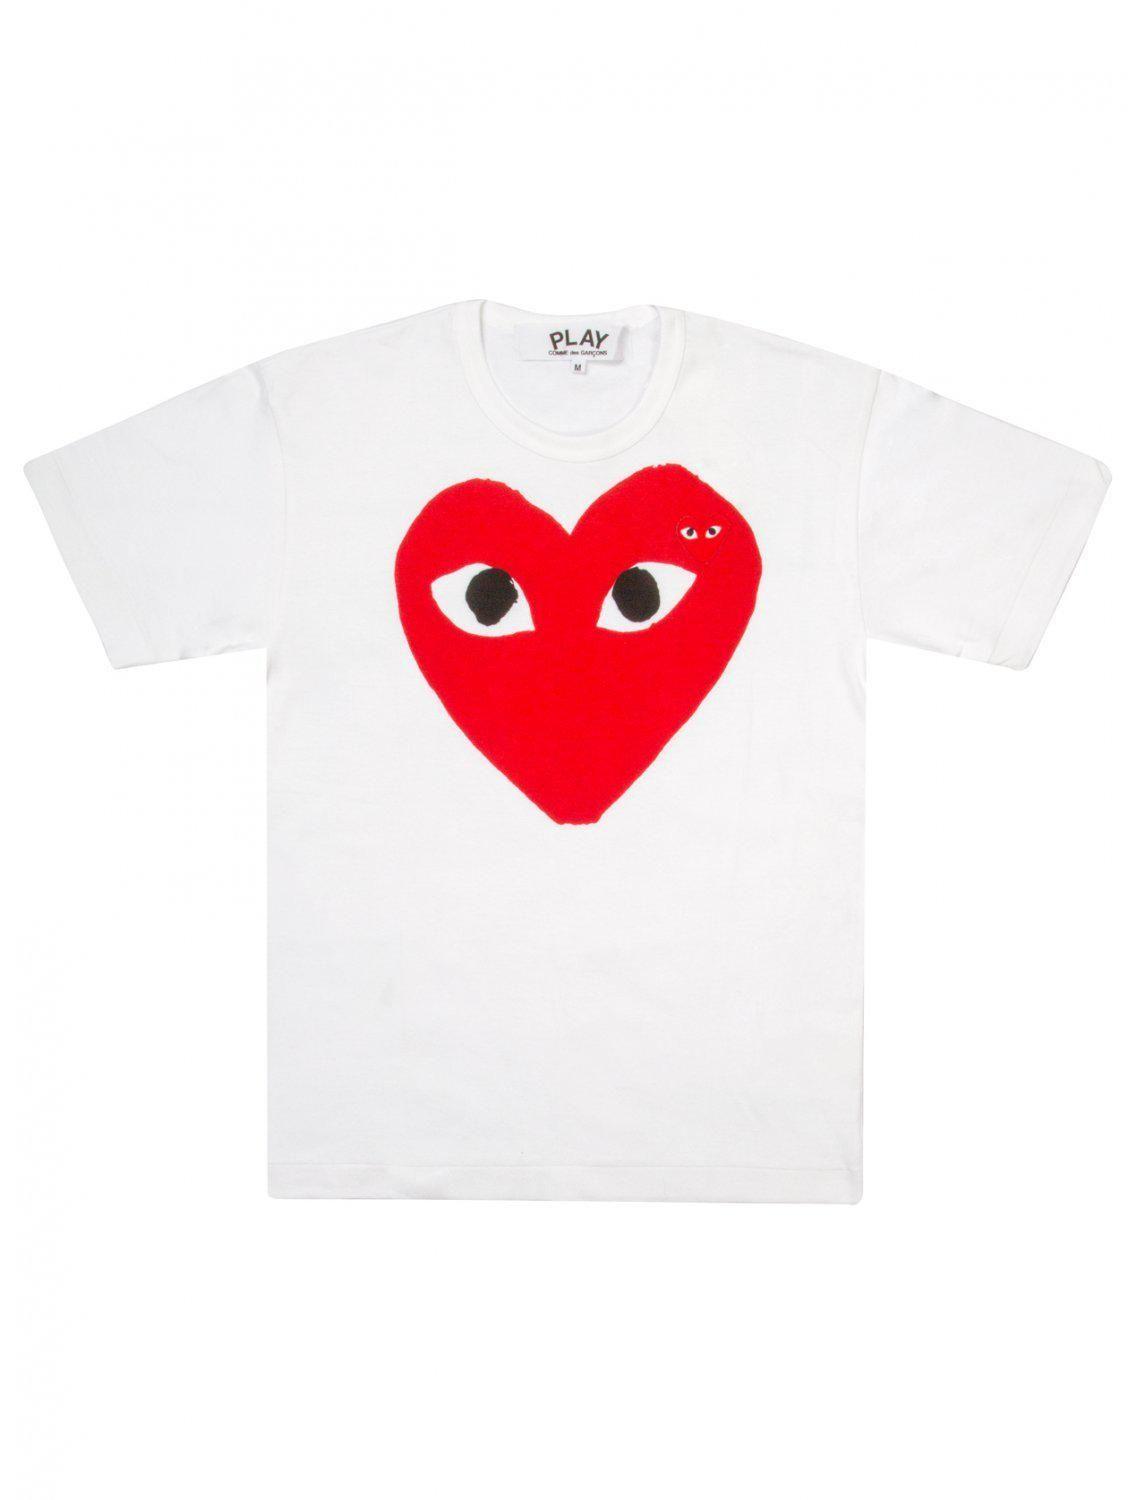 Red Heart Logo - Play Comme Des Garçons Play Red Heart Logo T Shirt In White